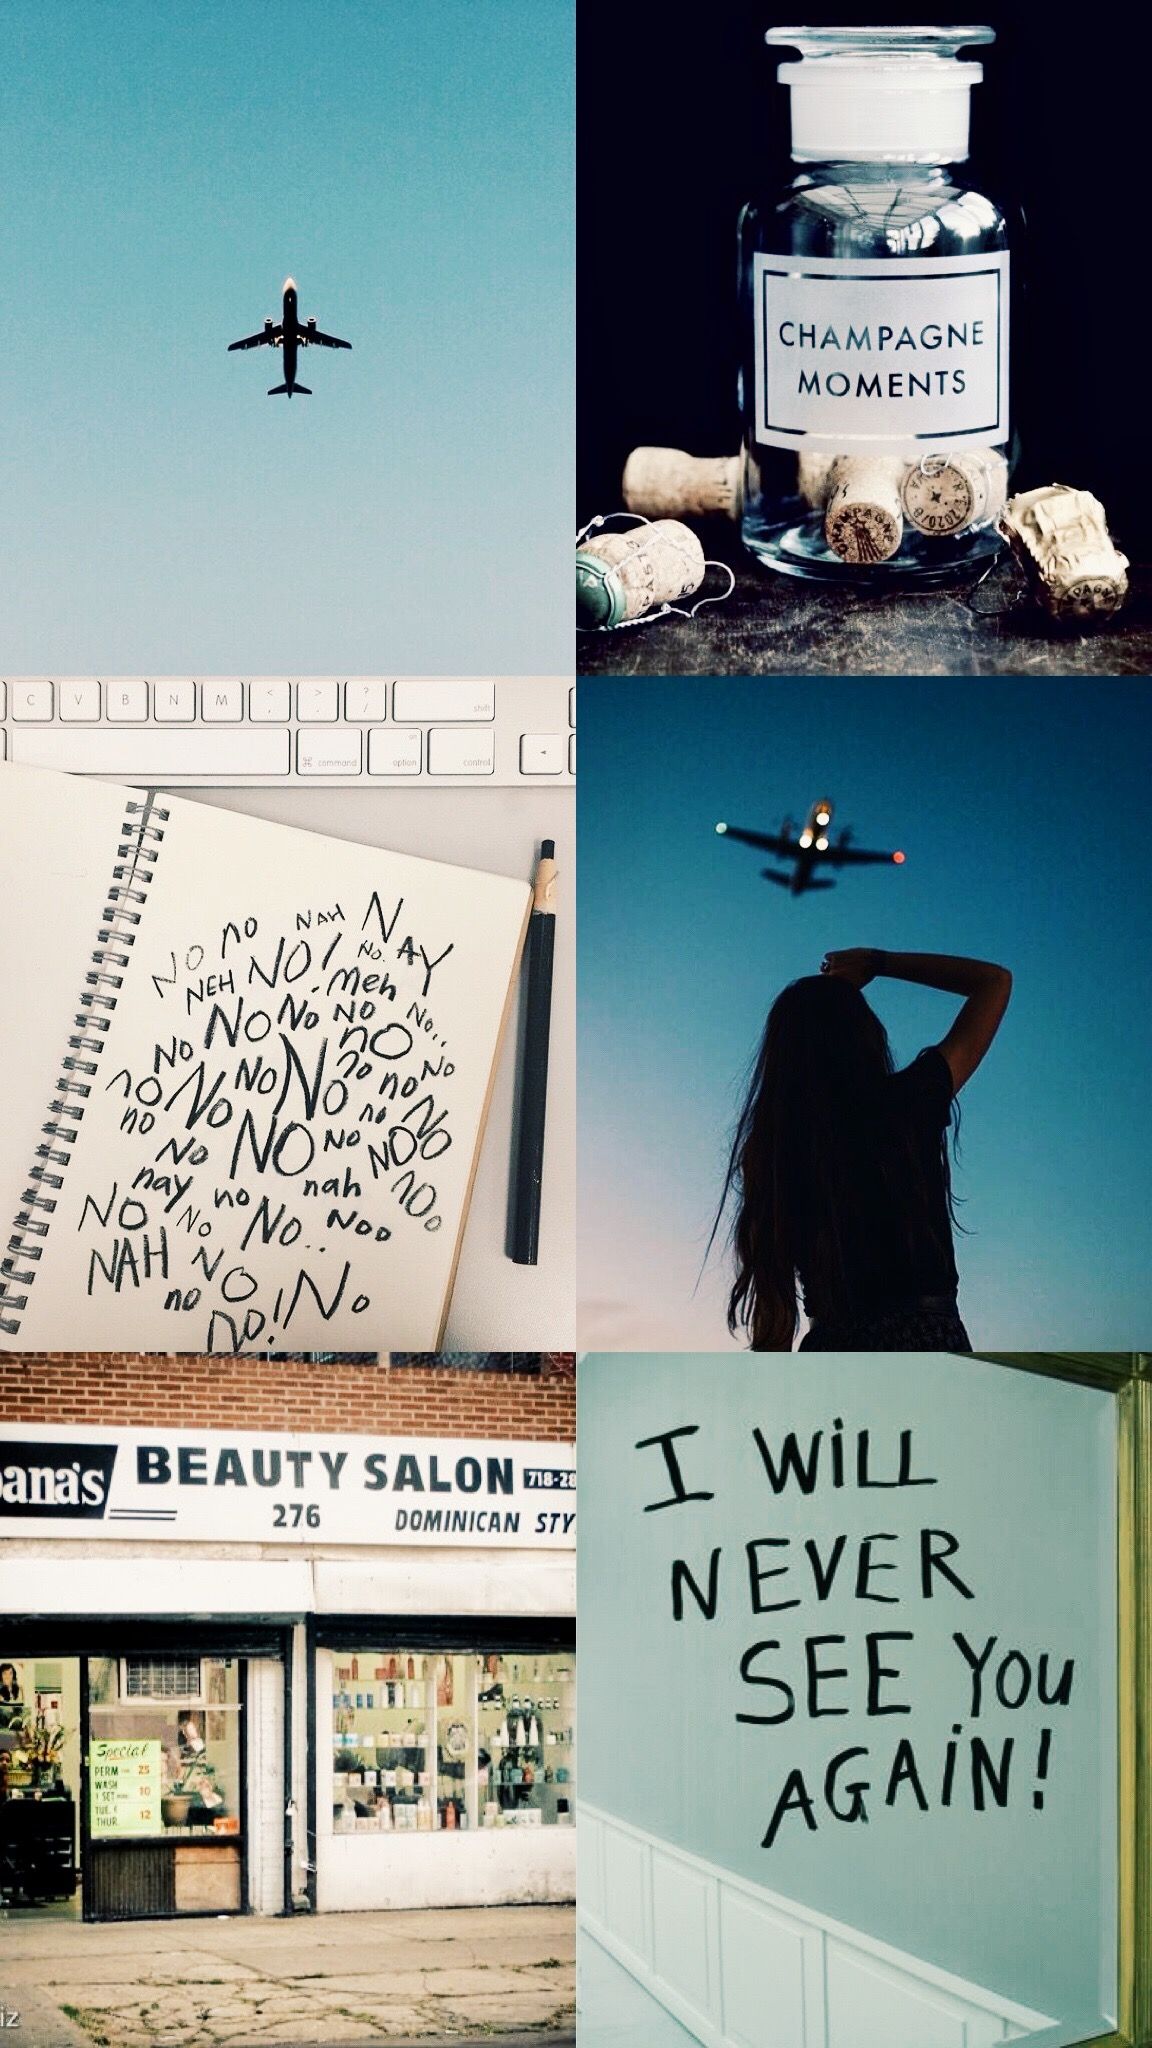 A collage of photos including an airplane, a champagne moment, a beauty salon, a notebook, and a woman with words written on a wall. - Broadway